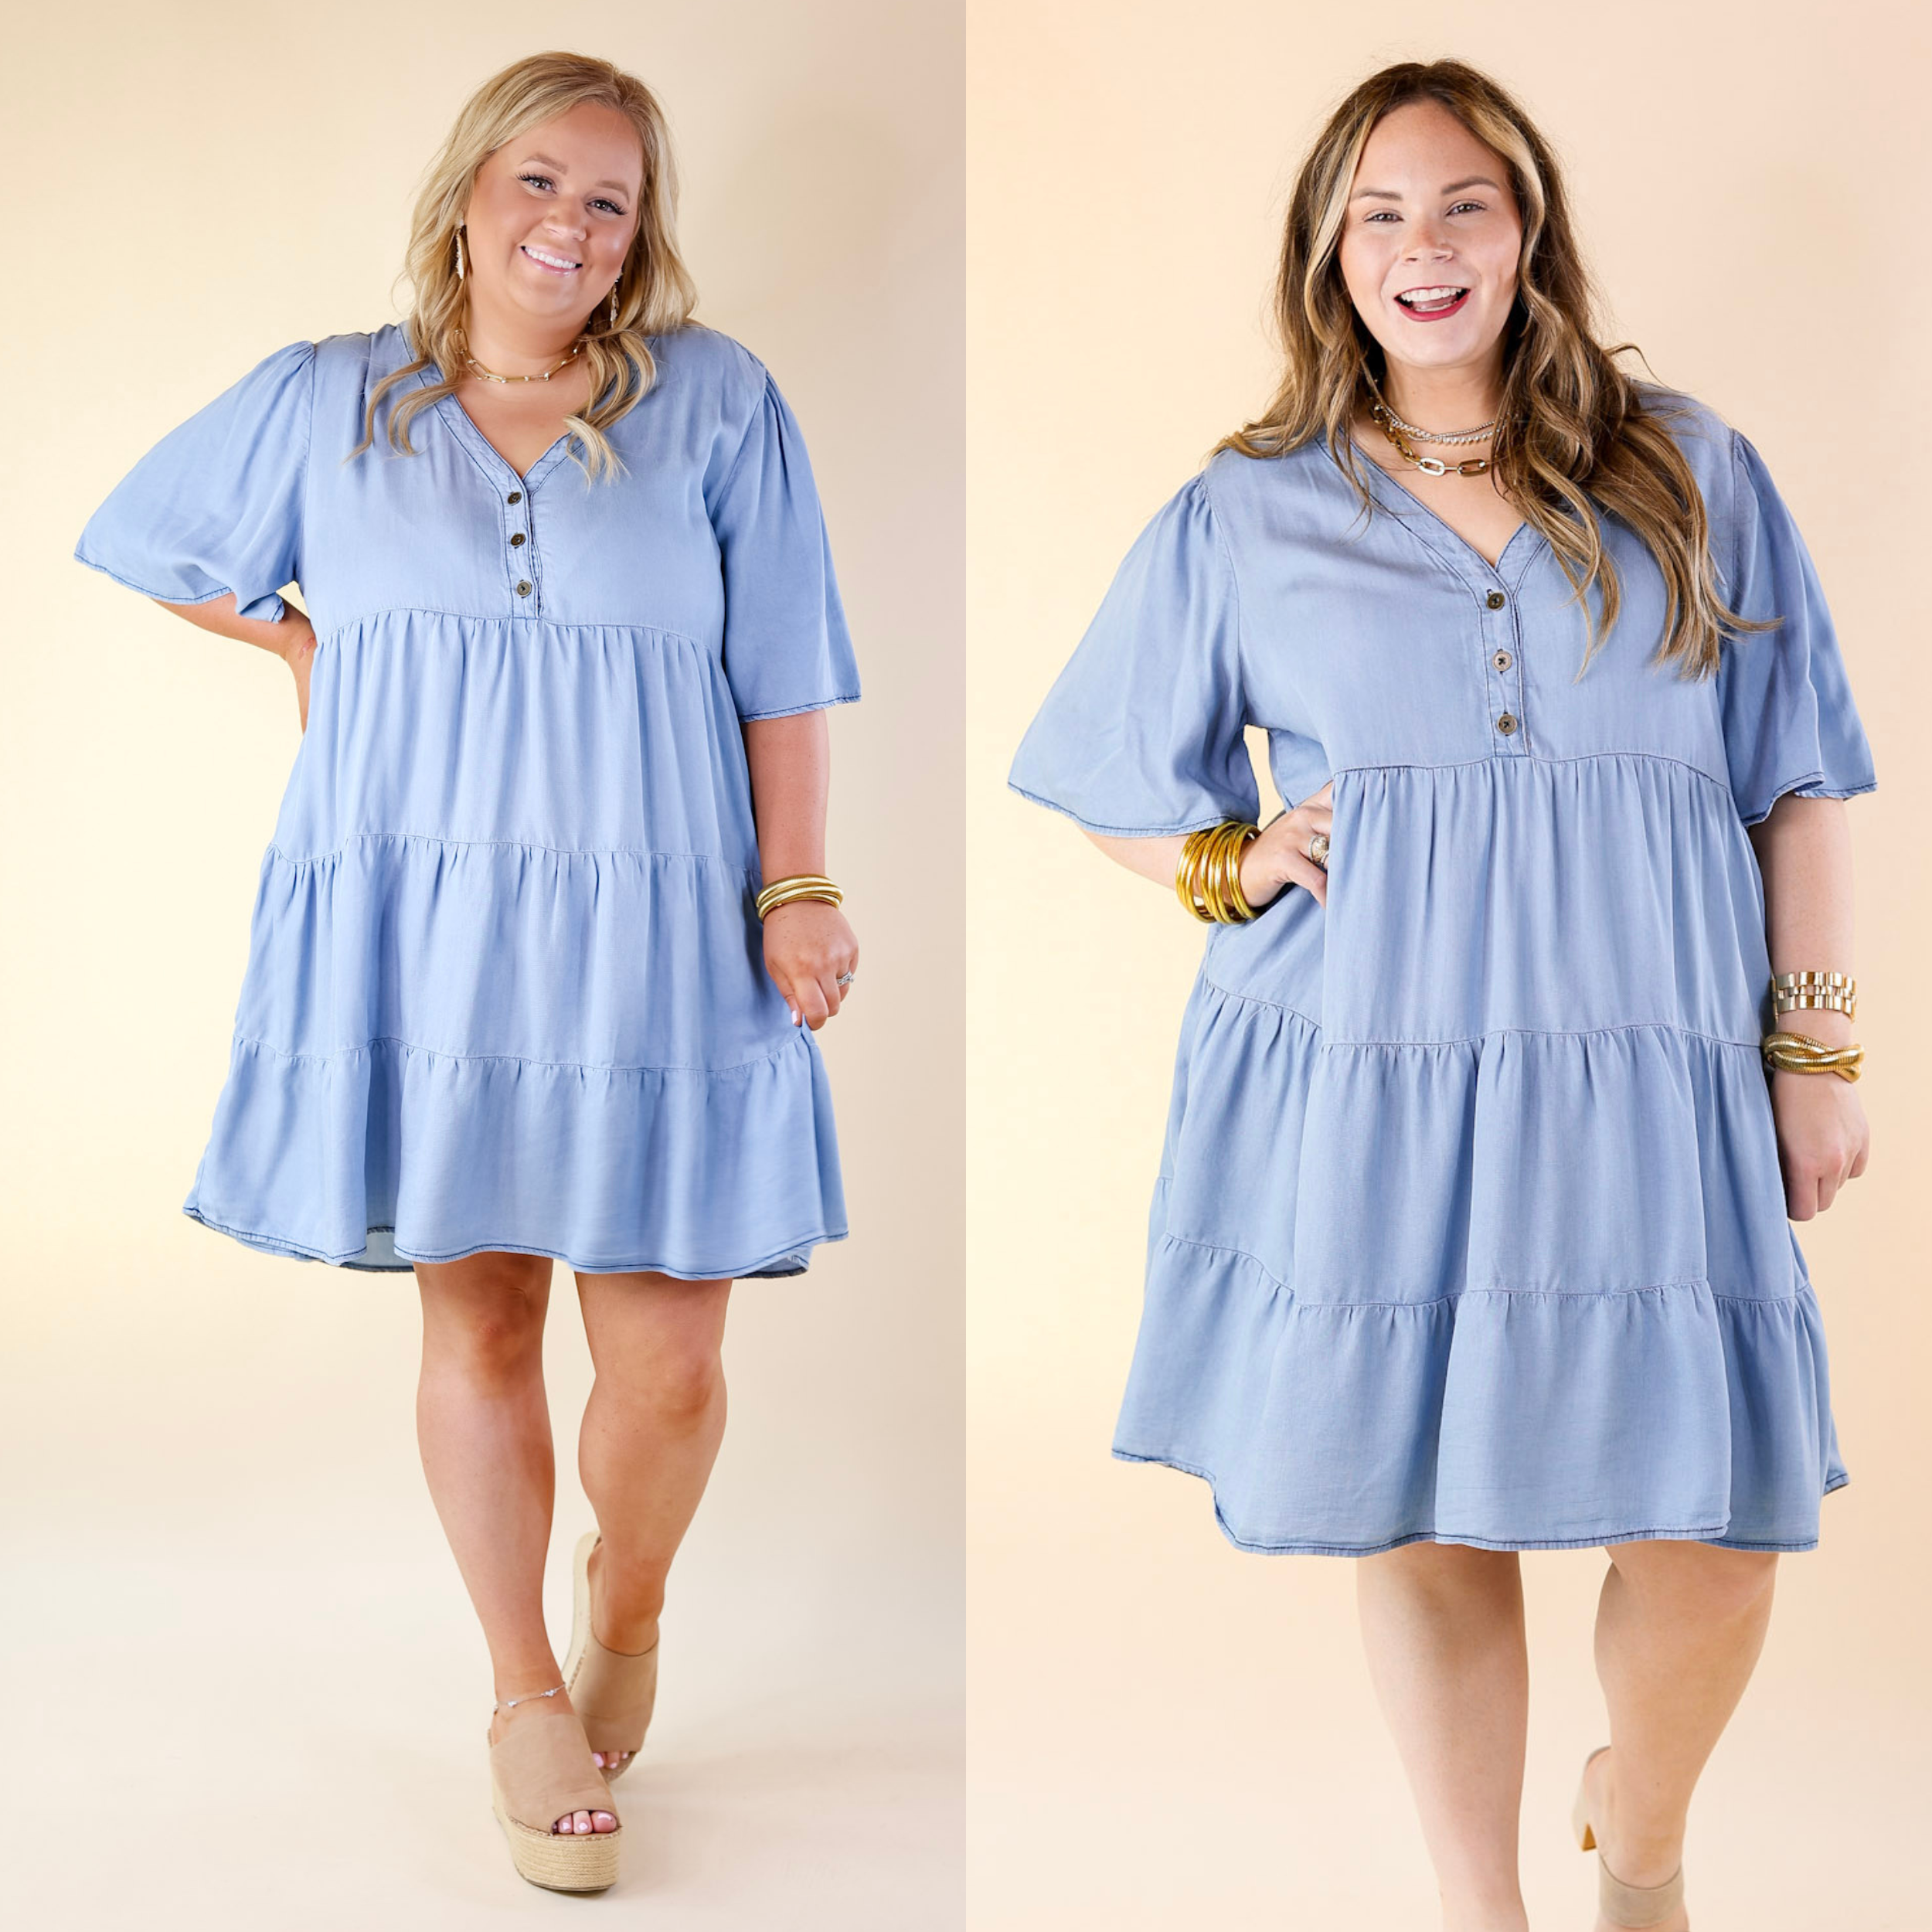 Truly Darling Chambray Tiered Dress with Button Up Yoke in Light Wash - Giddy Up Glamour Boutique